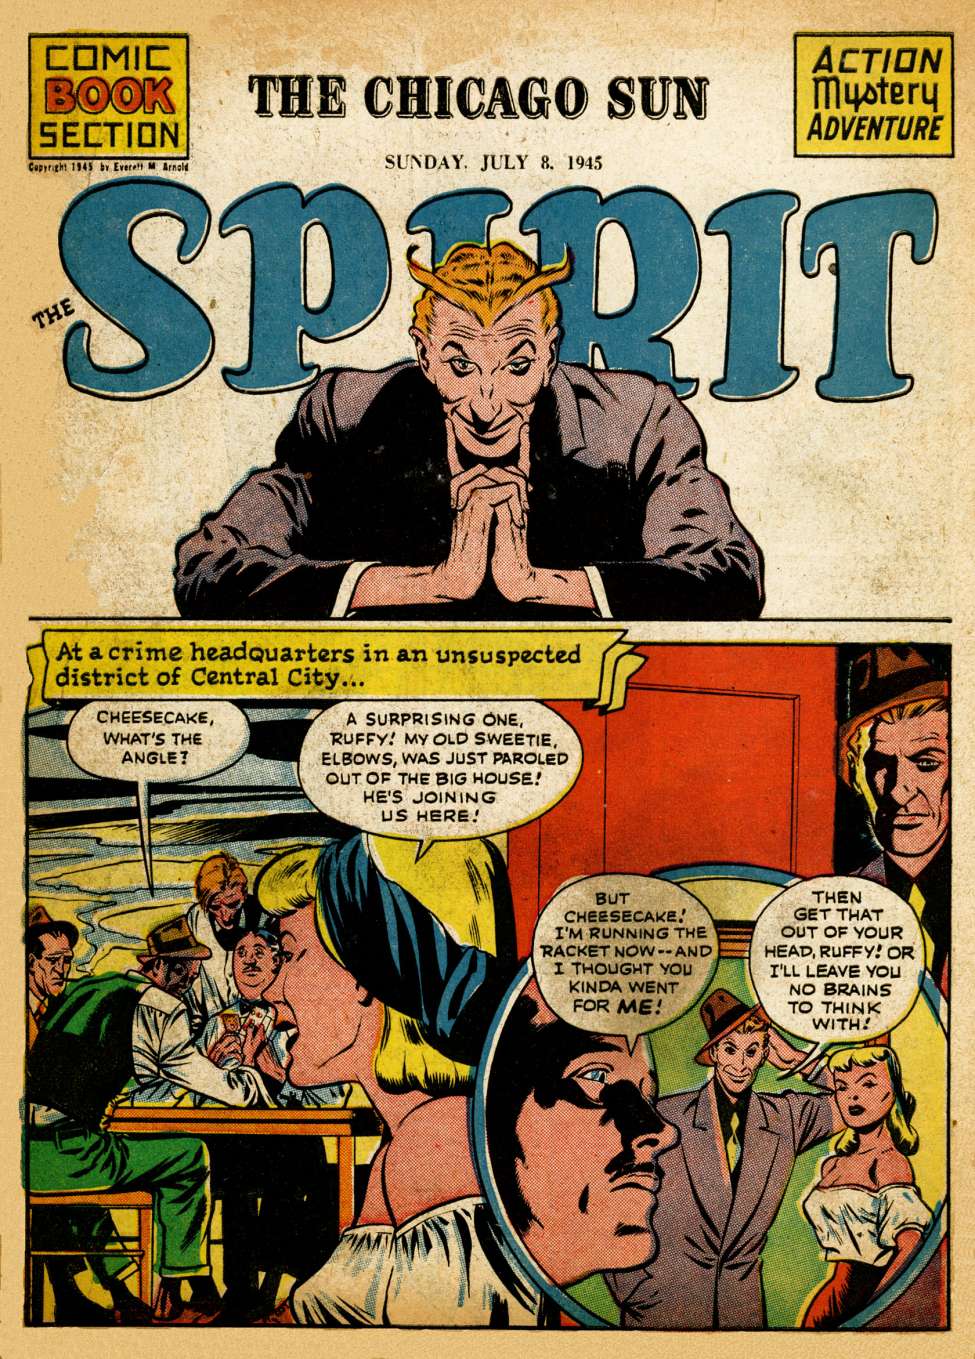 Book Cover For The Spirit (1945-07-08) - Chicago Sun